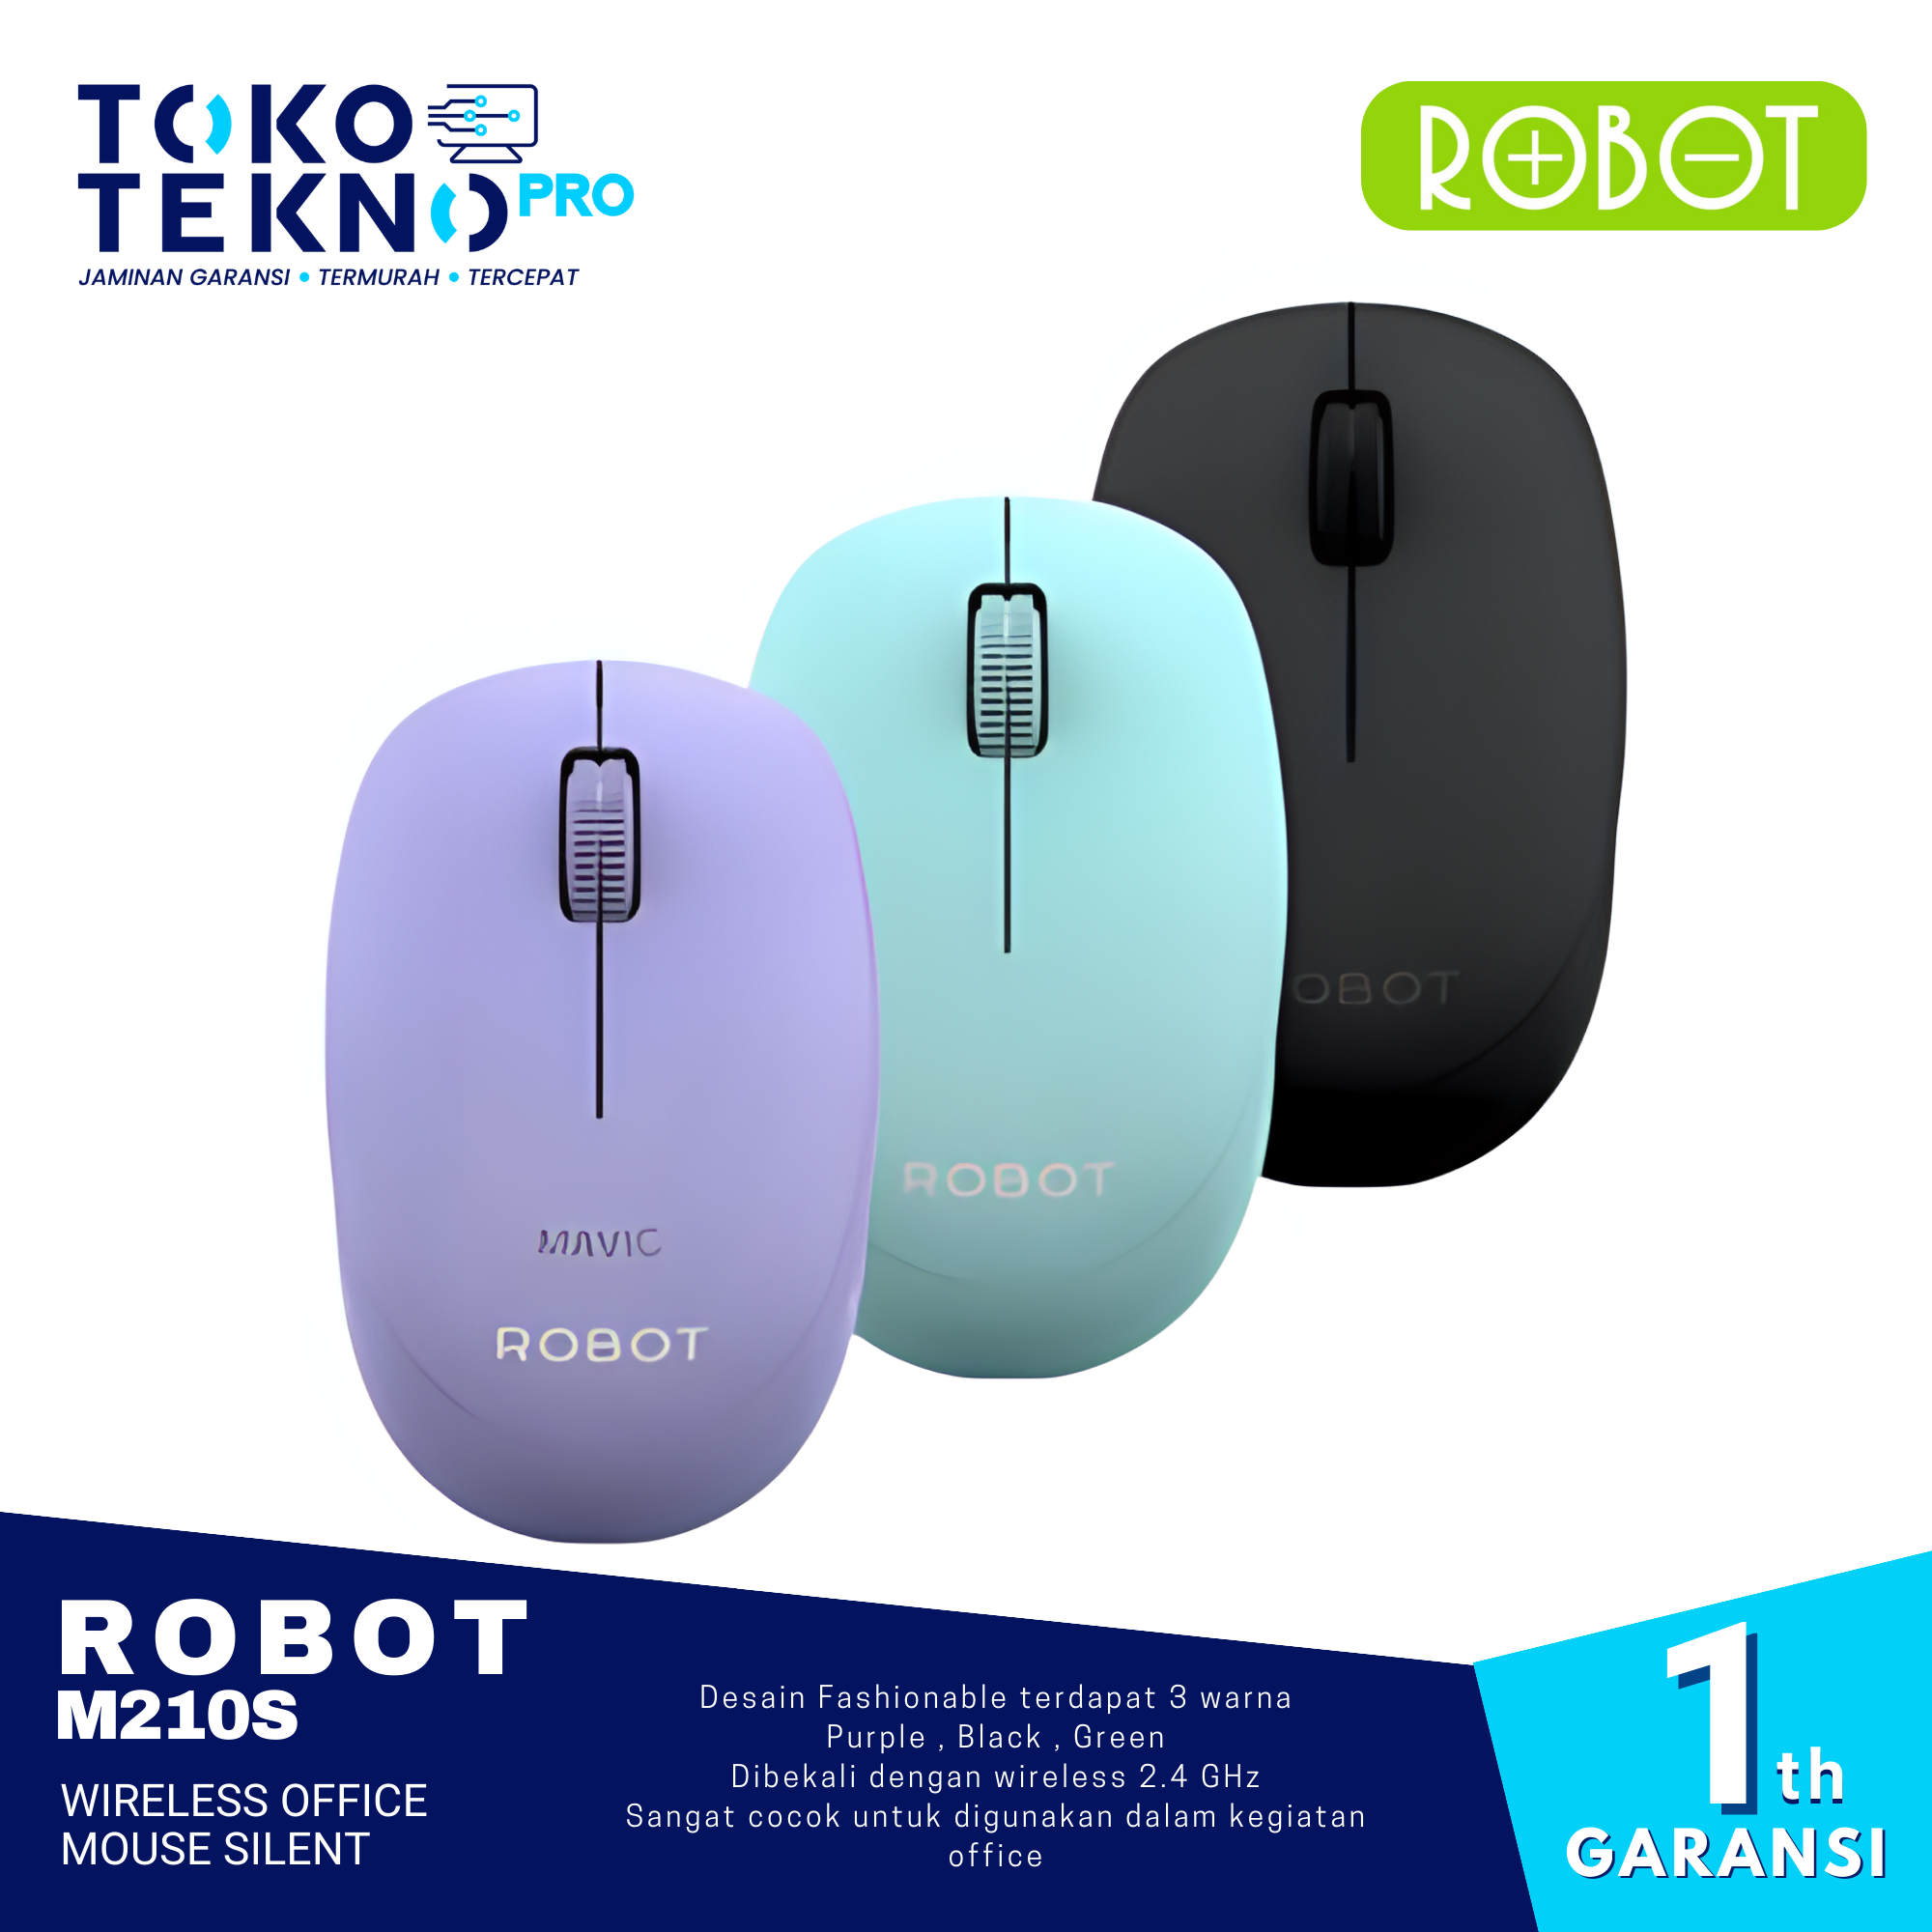 Robot M210s / M210-s Wireless Office Mouse Silent